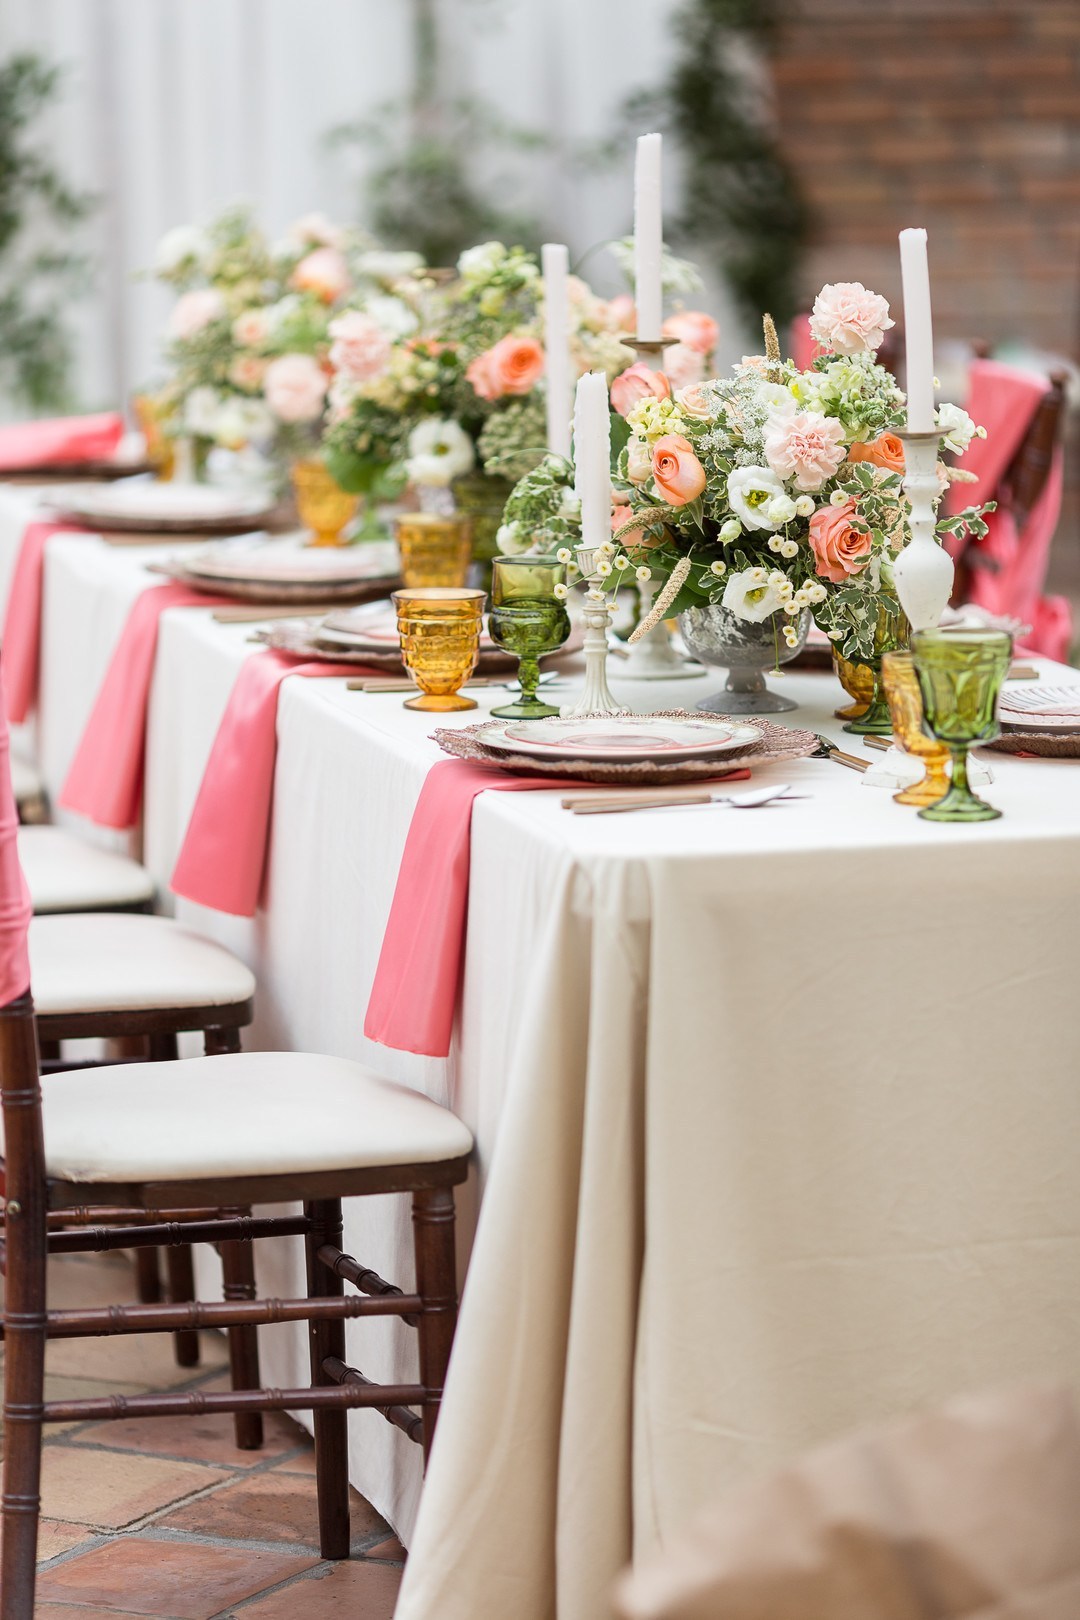 The florals were tender   blush, coral pink and white blooms and some greenery, candles added chic to the setting